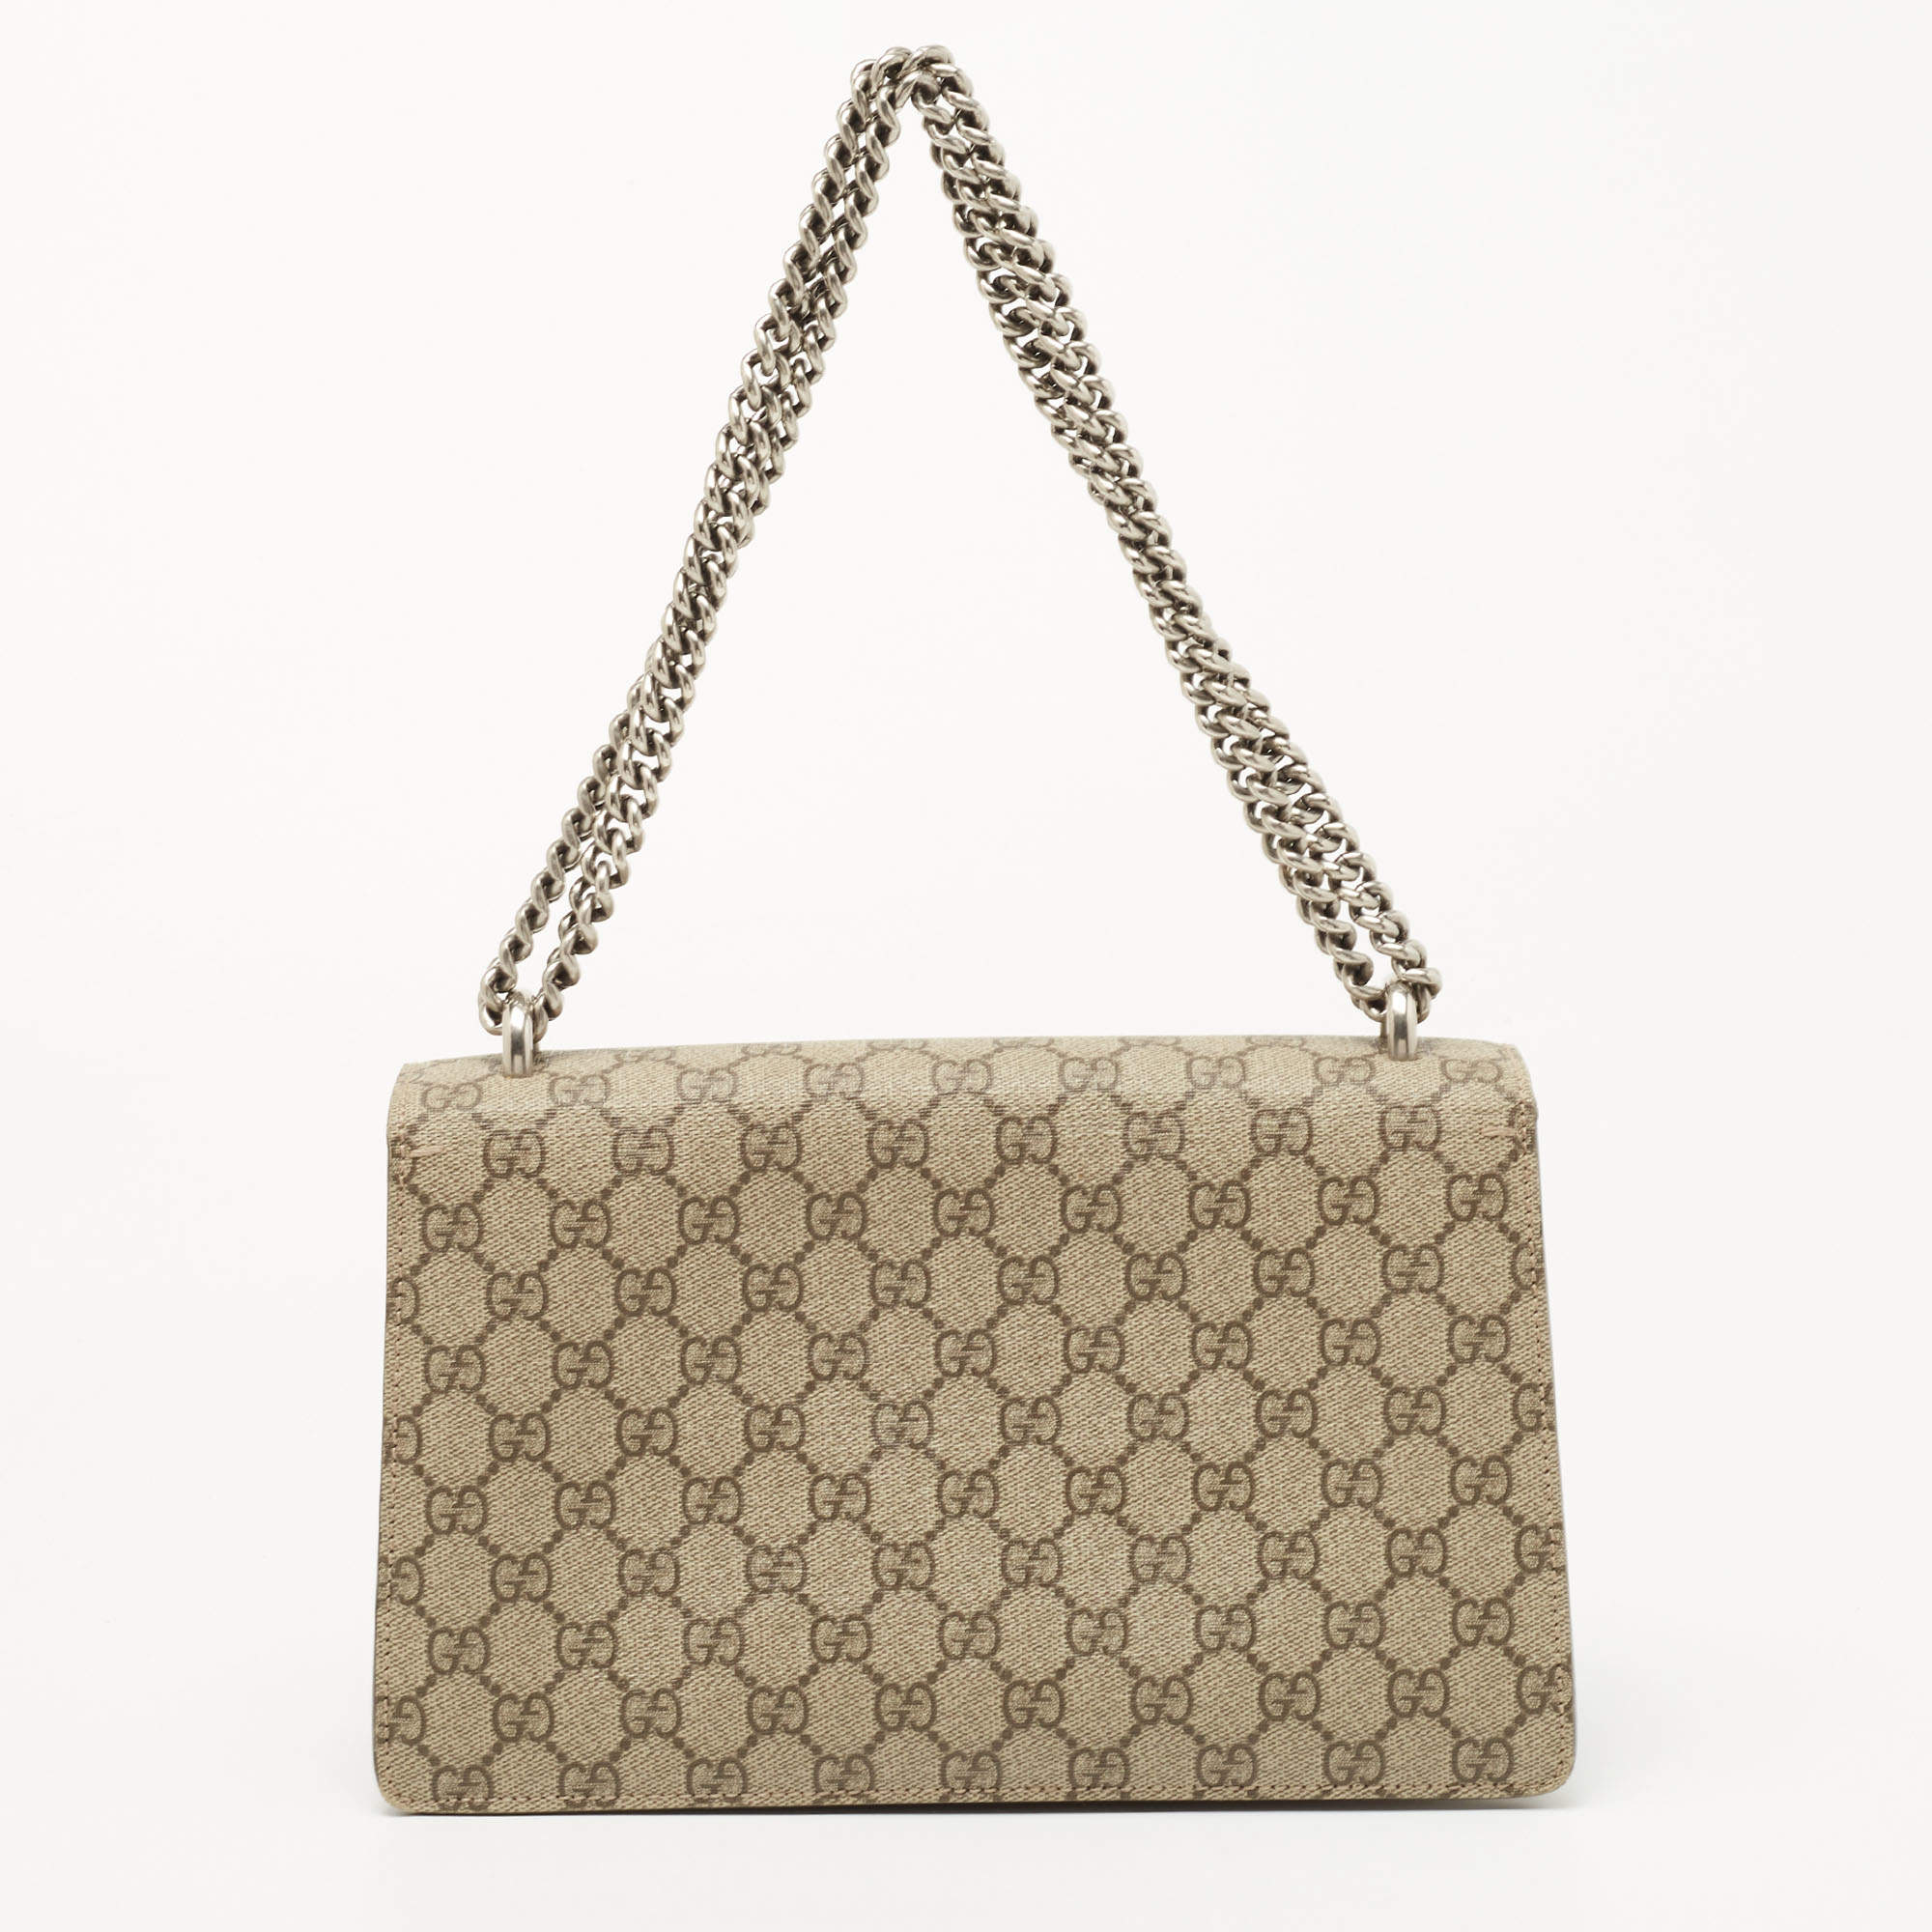 Gucci Beige GG Supreme Canvas and Suede Small Dionysus Shoulder Bag Gucci